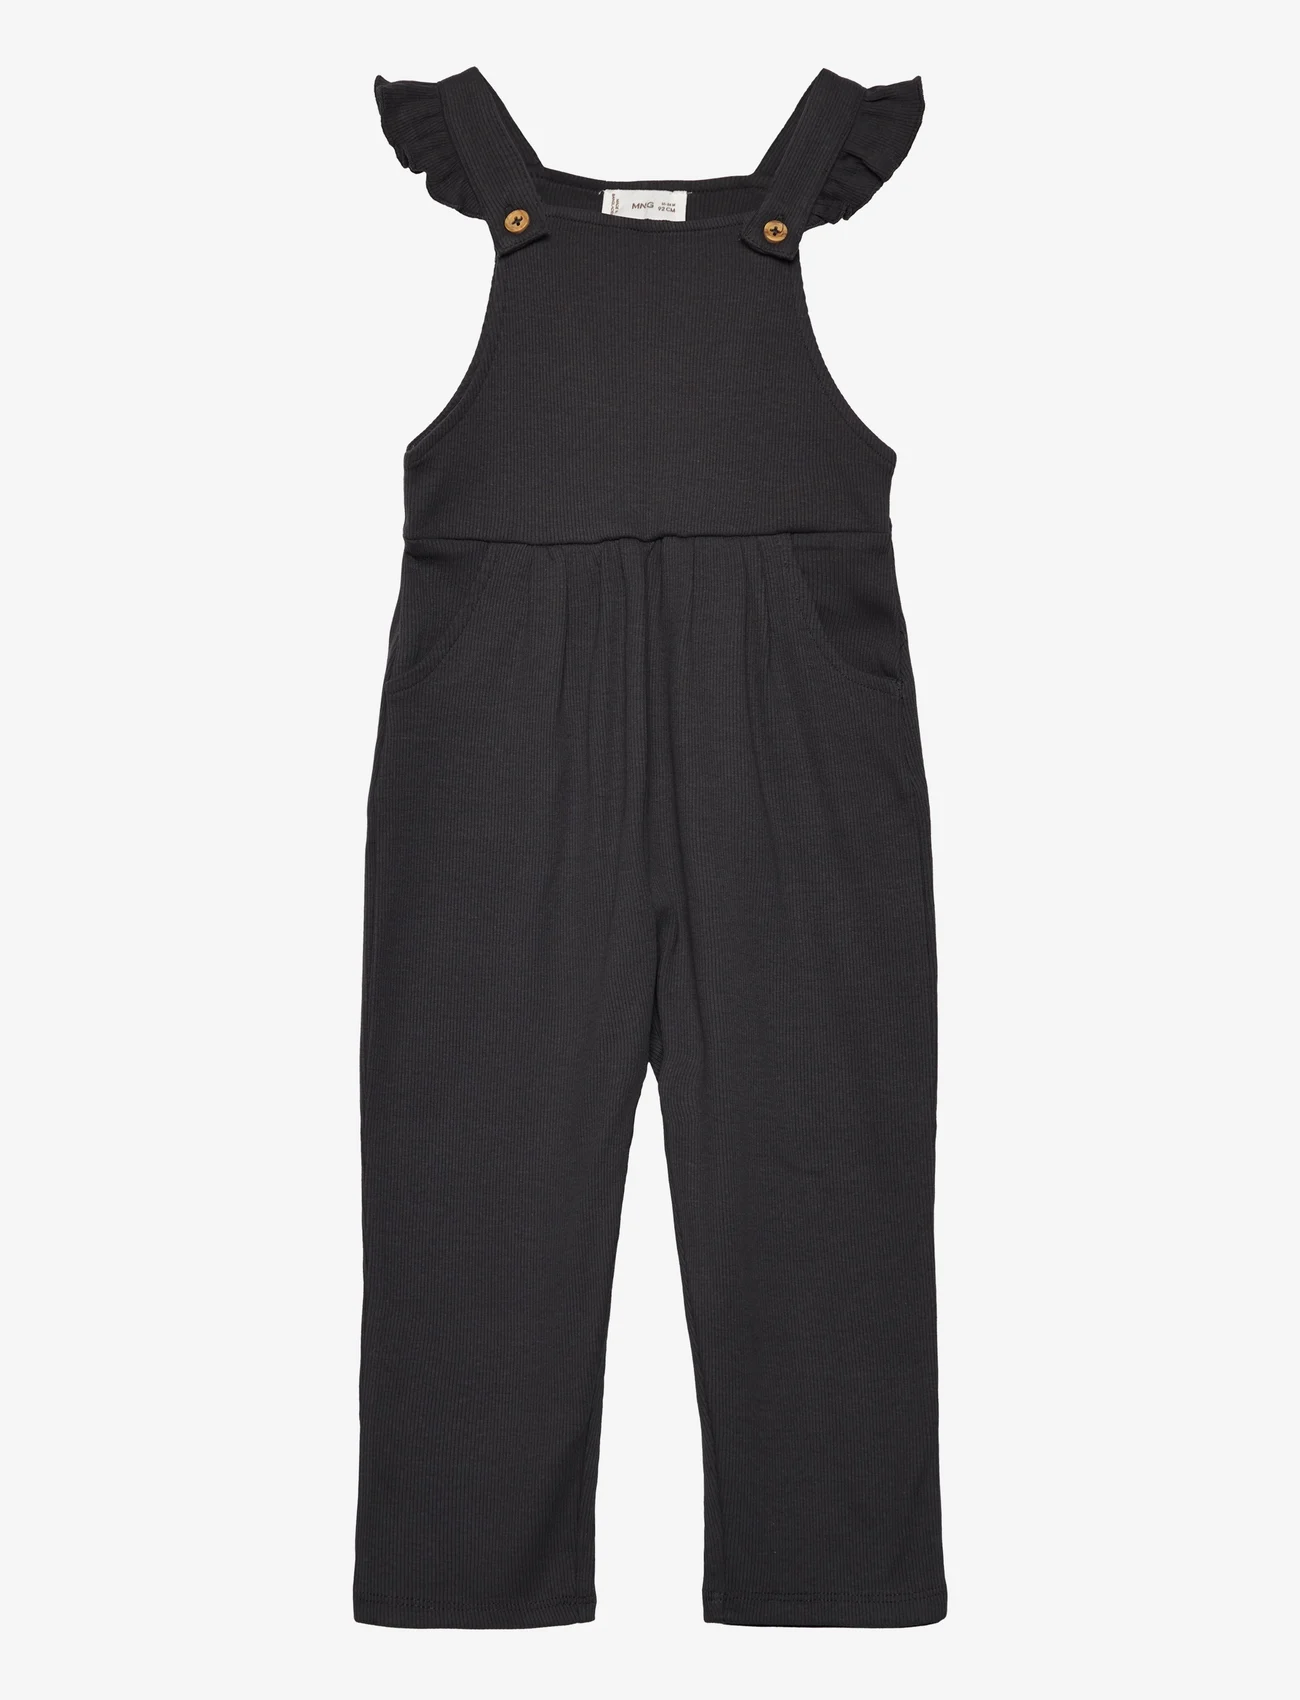 Mango - Cotton knit dungarees - sommarfynd - charcoal - 0